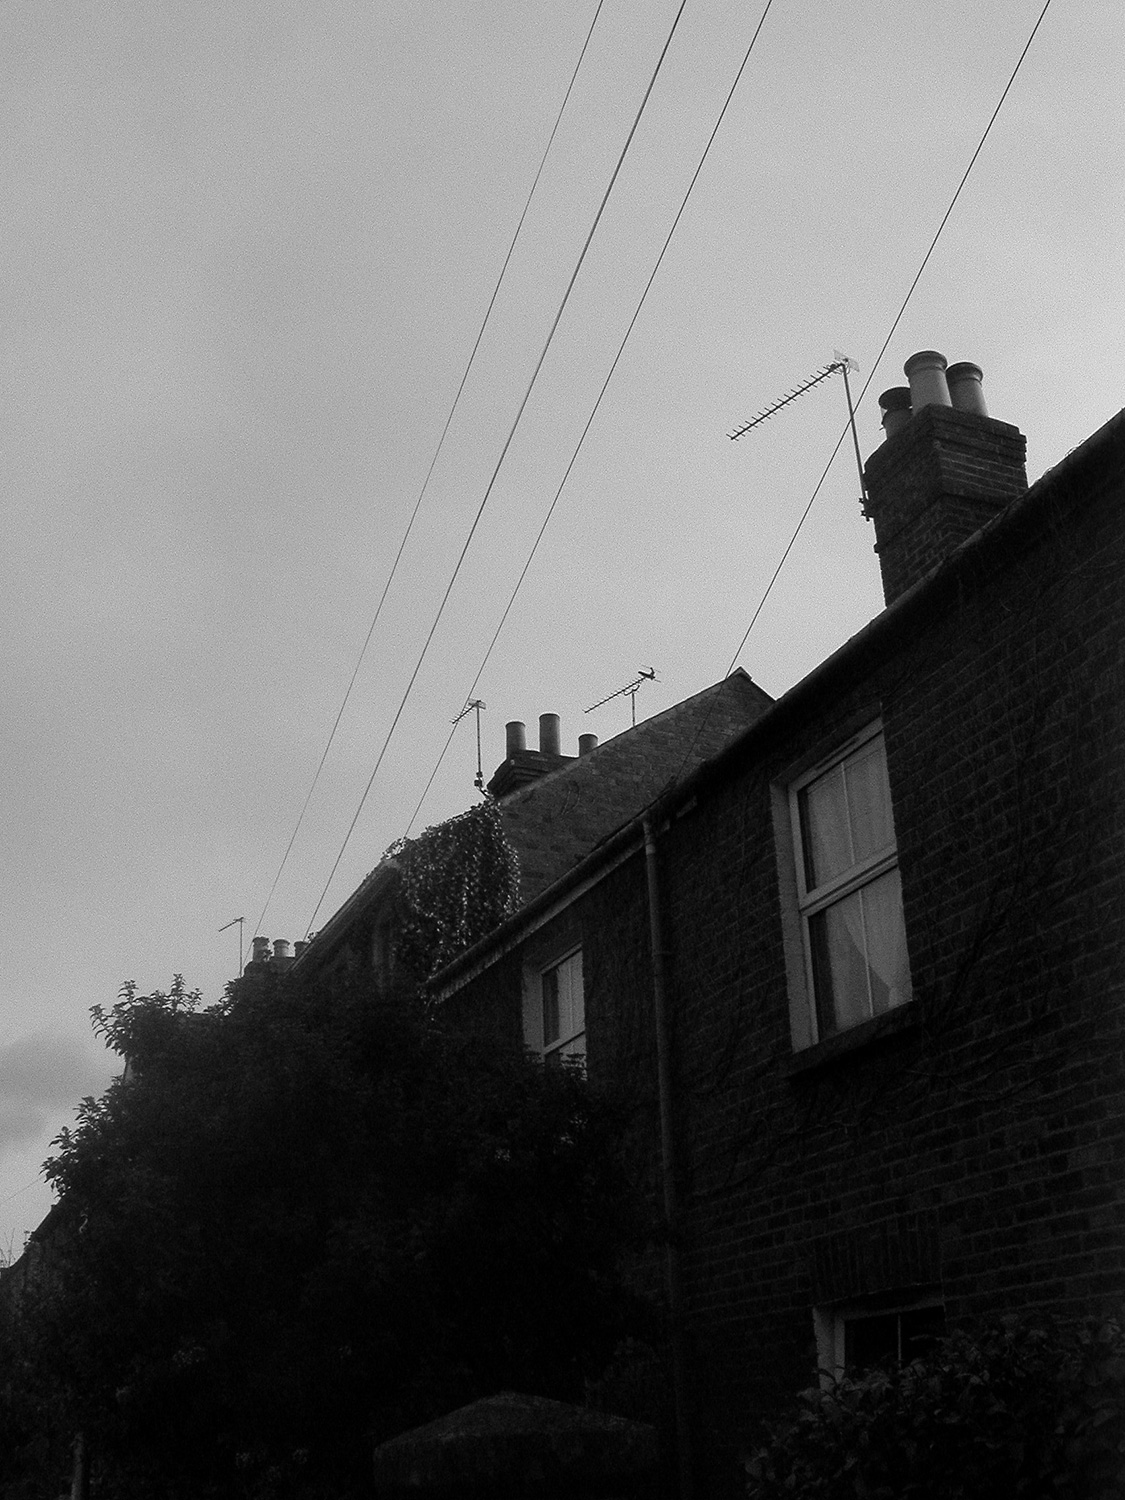 Power lines, row houses.